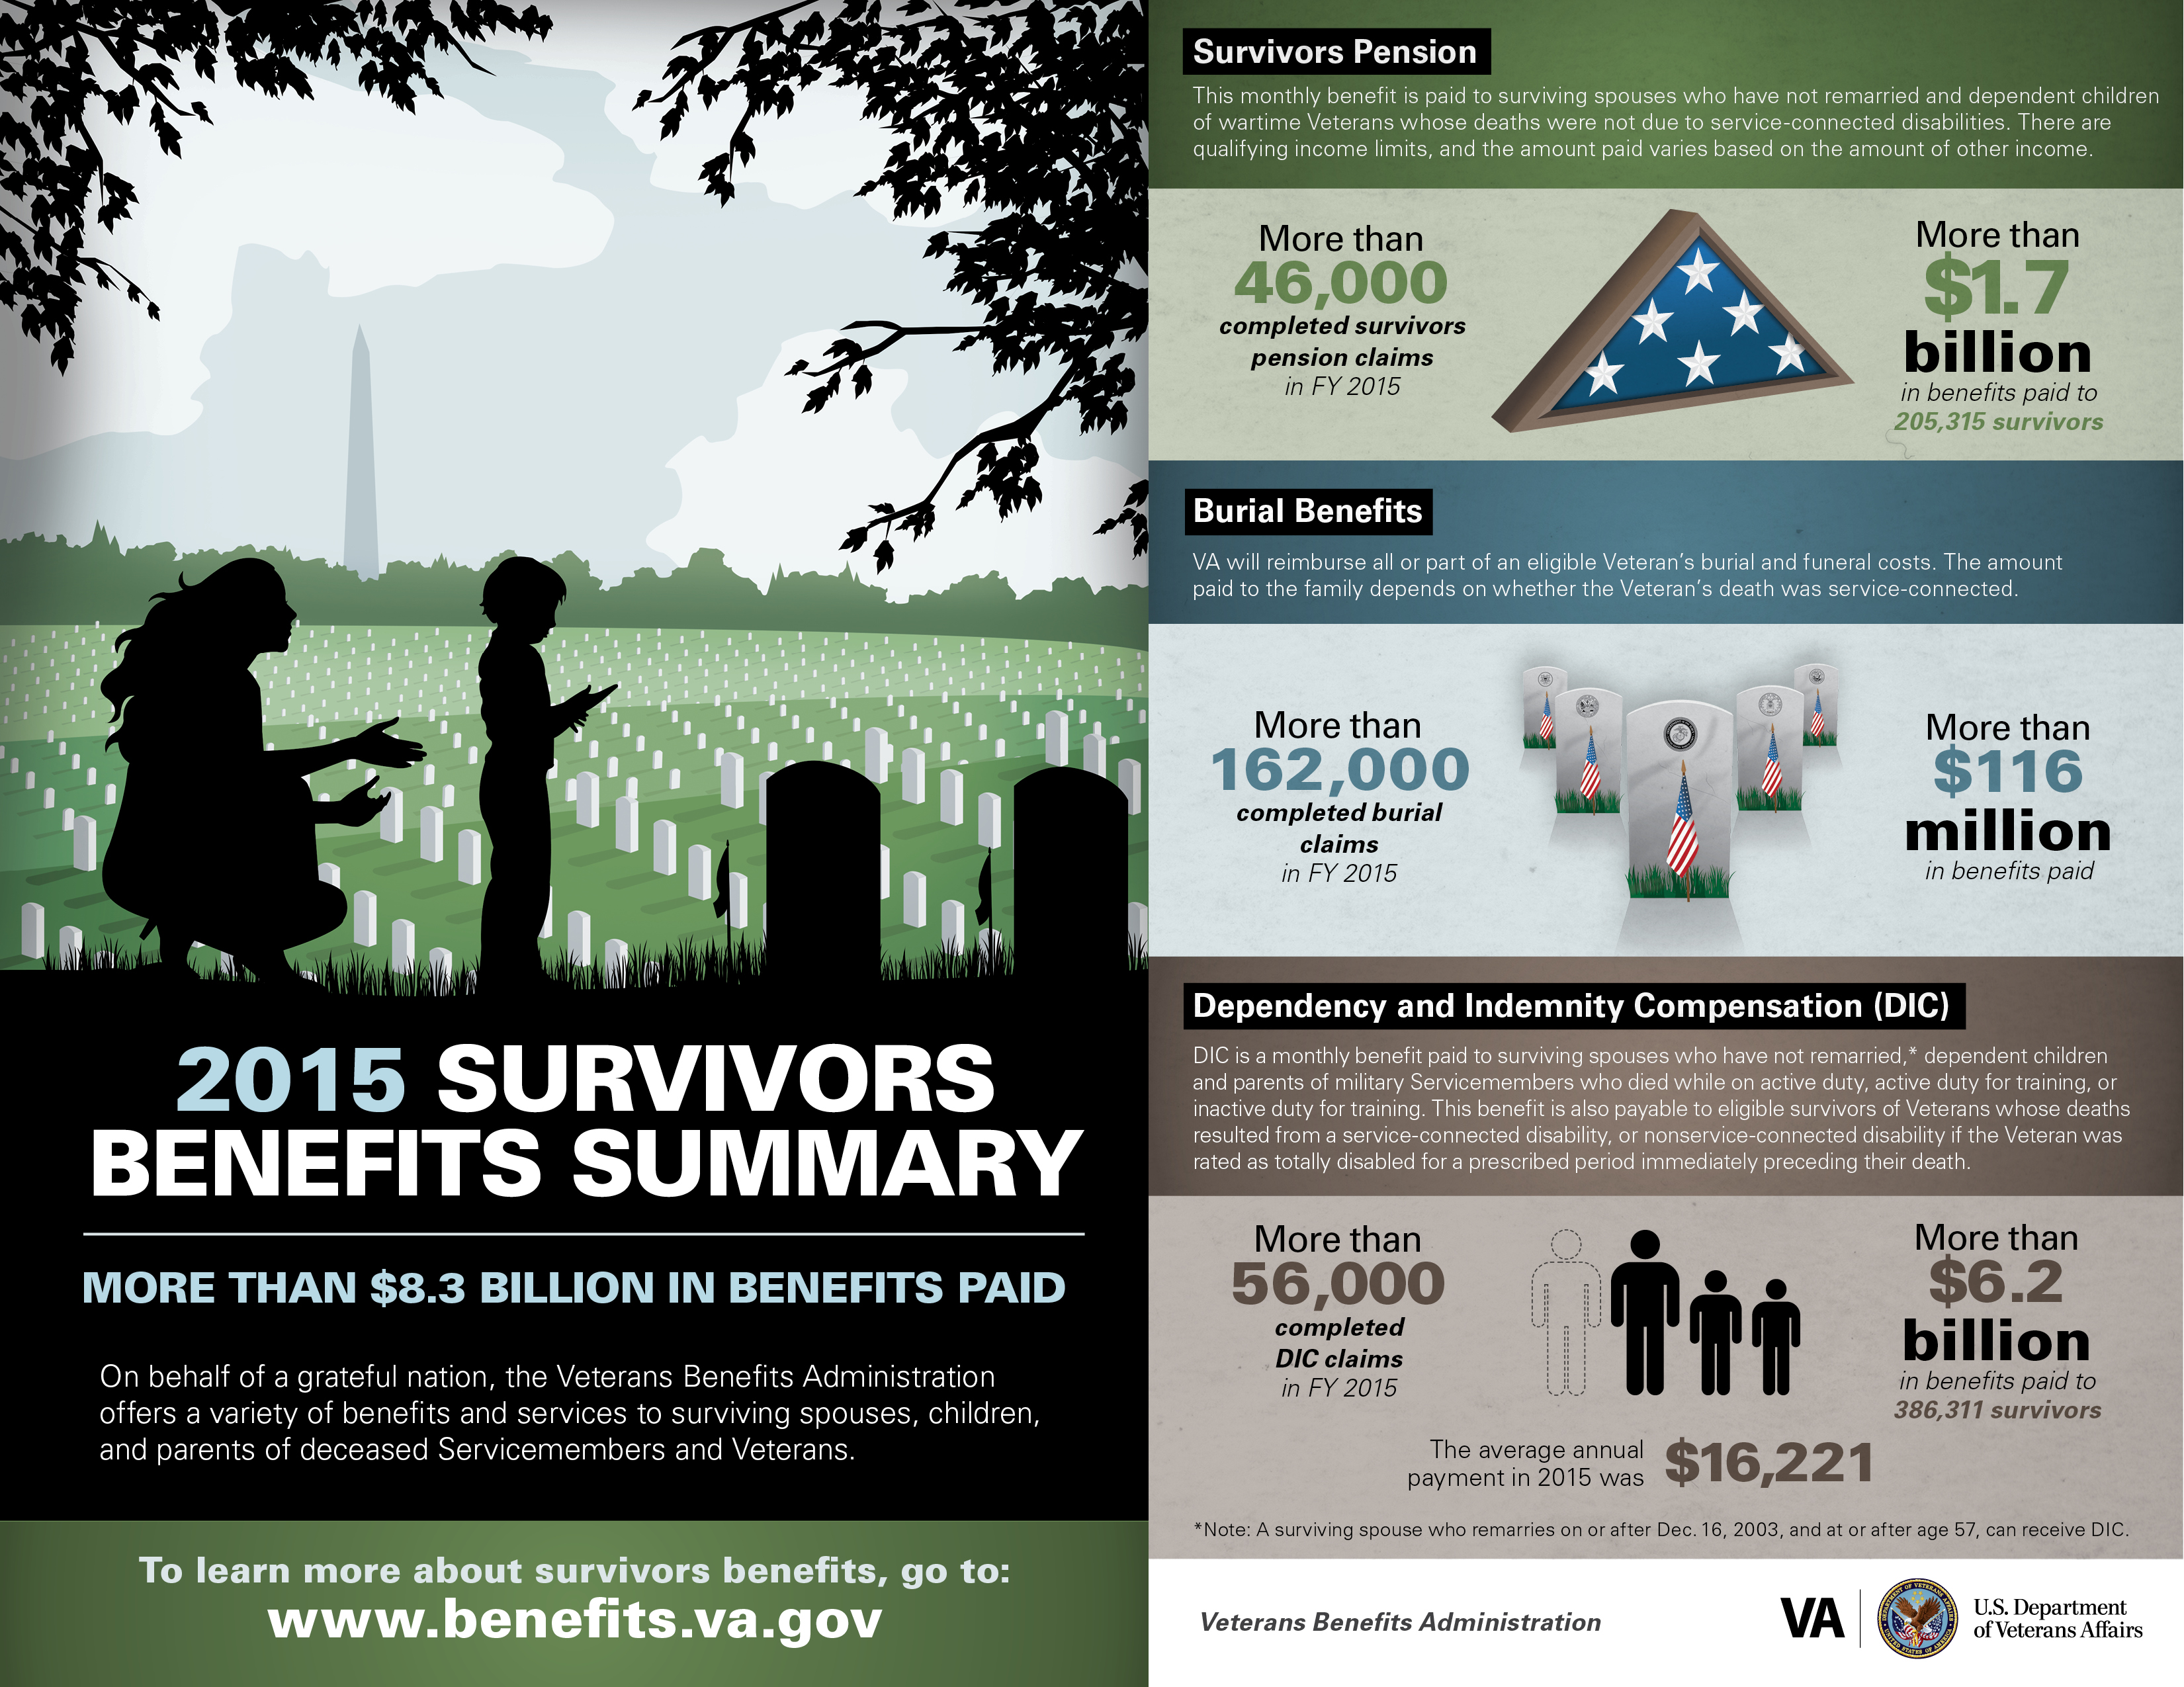 2015 Survivors' Benefits Summary. To learn more visit http://www.benefits.va.gov/pension. See PDF Download link to view an accessible PDF that addresses the text content of this document.